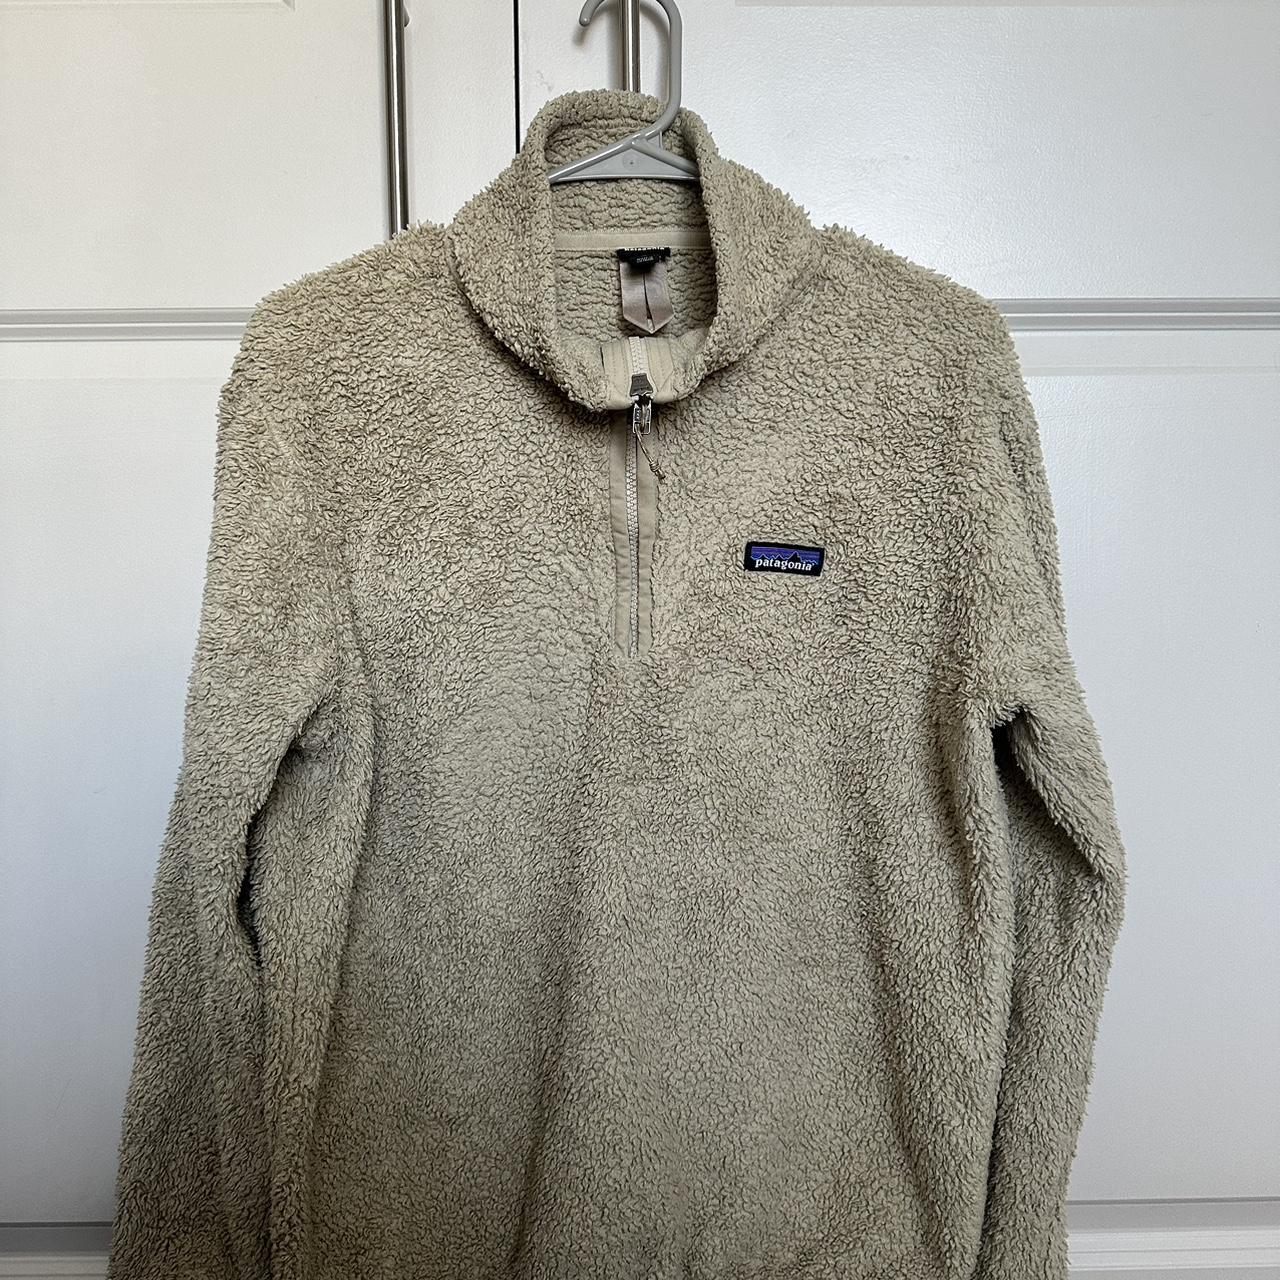 Patagonia teddy bear Sherpa 3/4 zip Supper soft and... - Depop